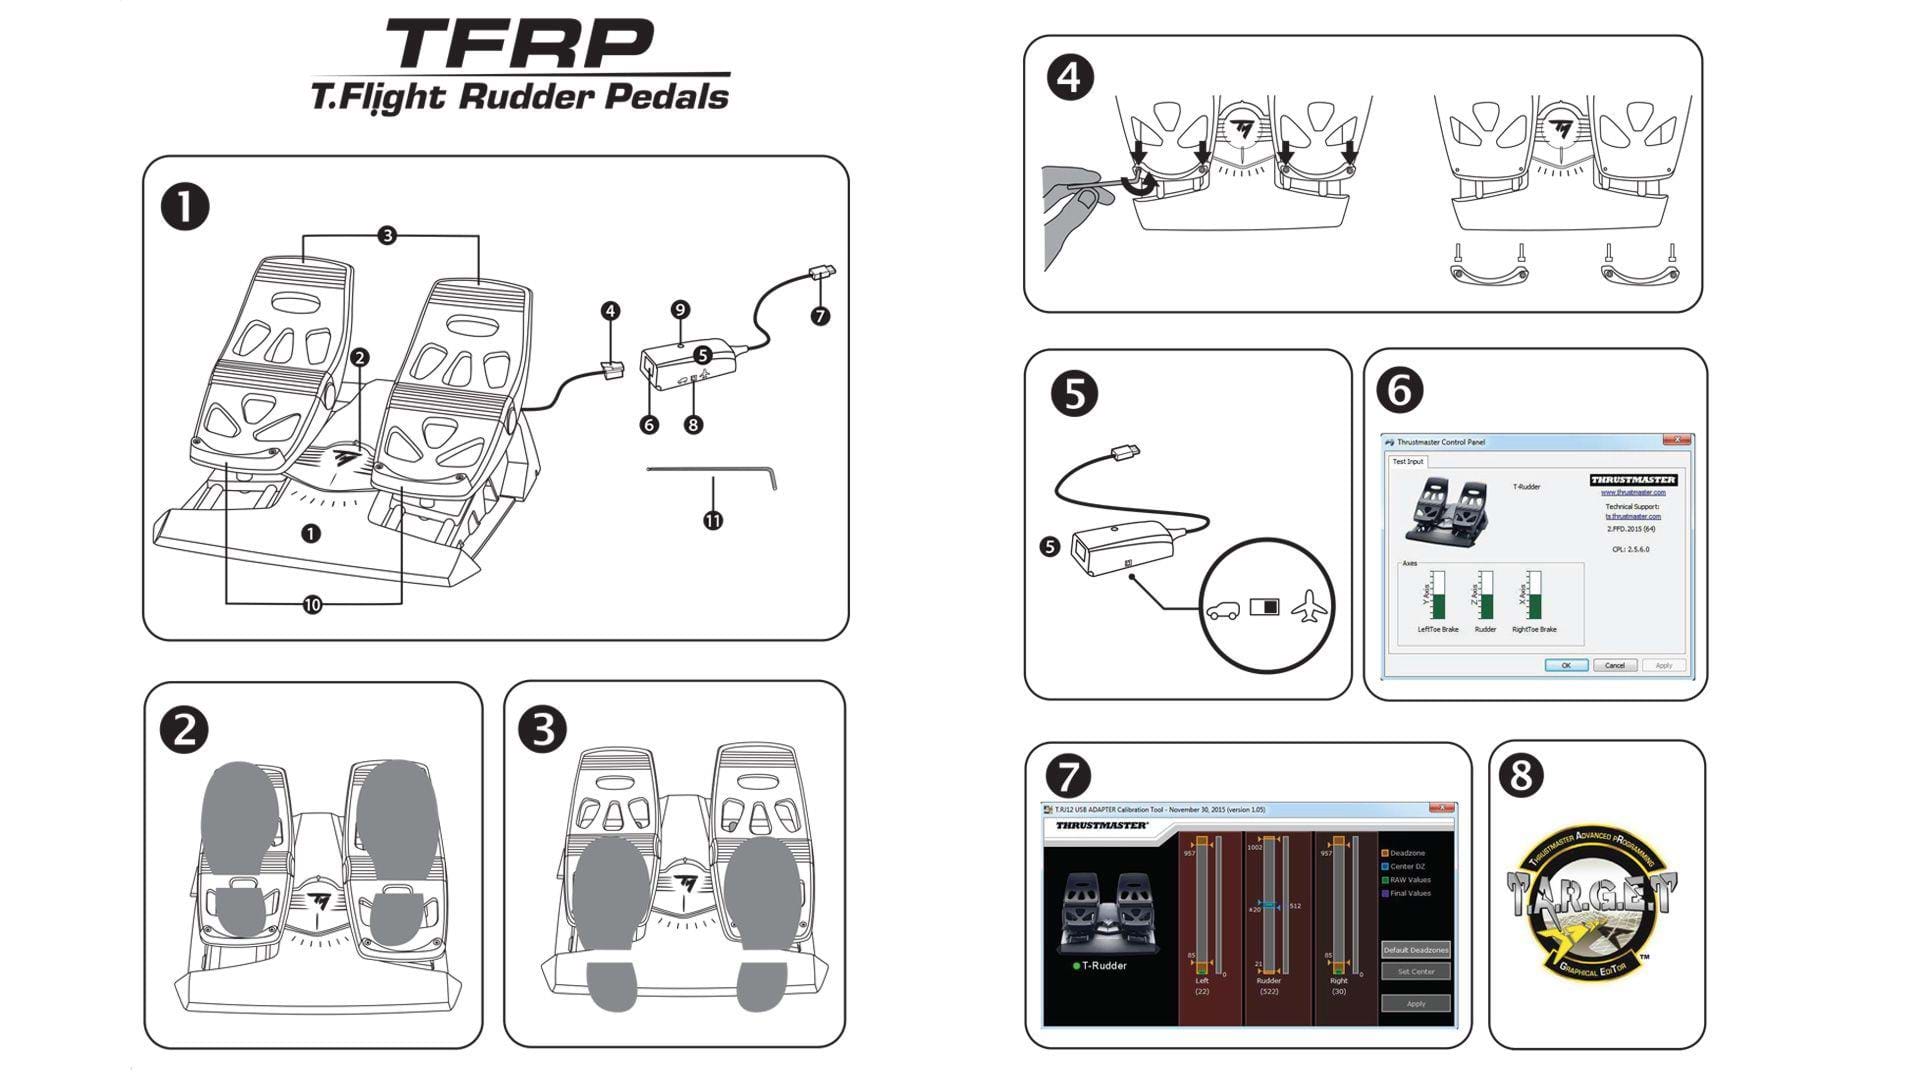 Thrustmaster TRFP Rudder Pedals - heel rest removal manual